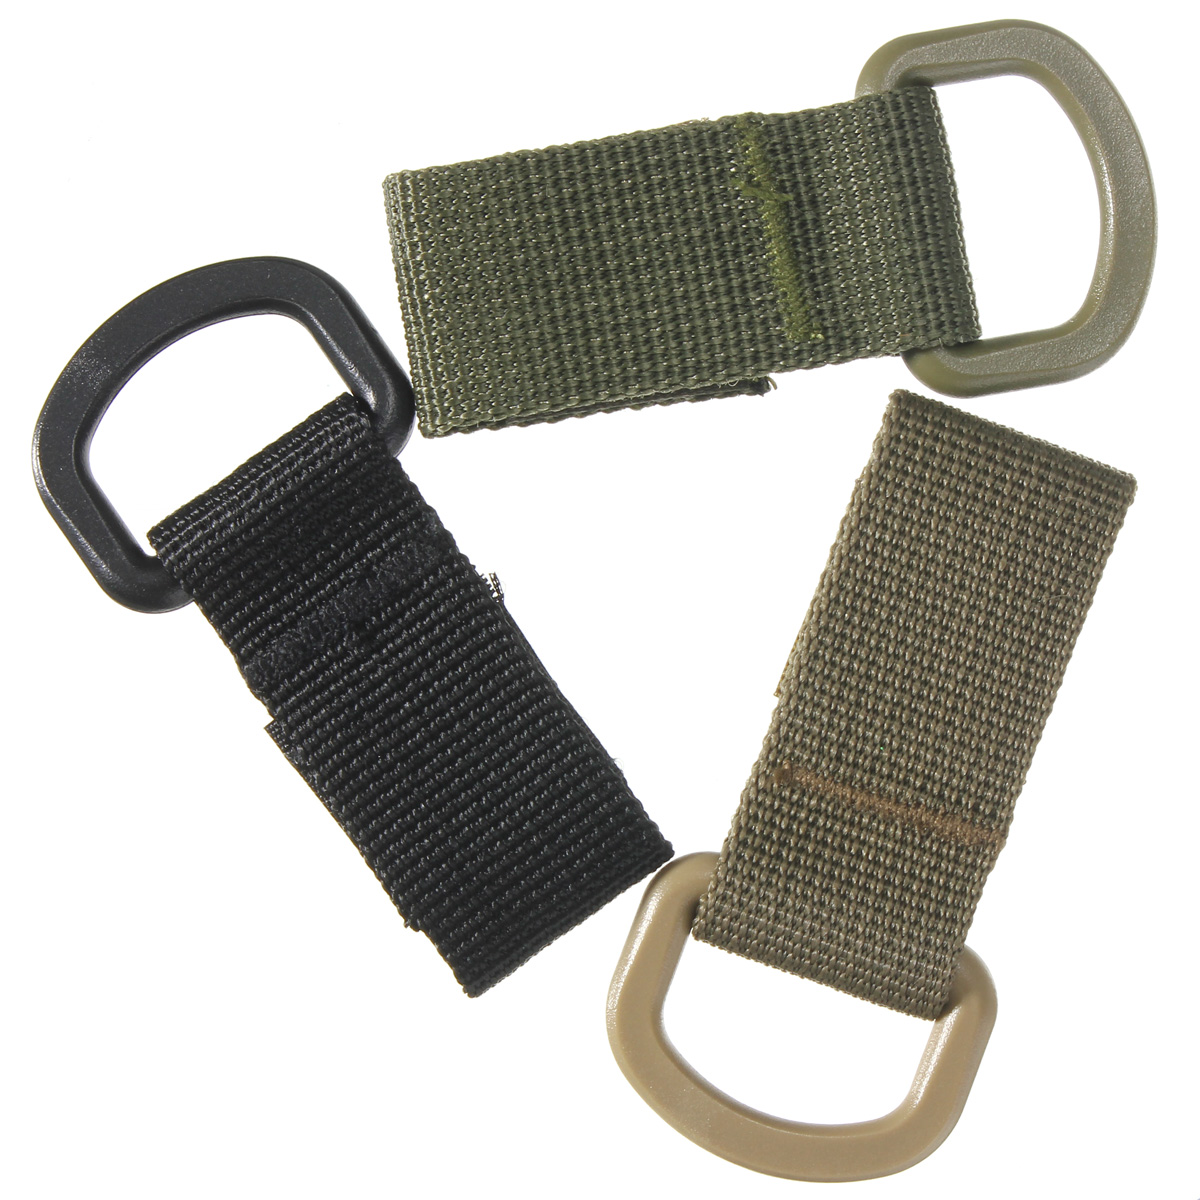 Military-Tactical-Carabiner-Nylon-Strap-Buckle-Hook-Belt-Hanging-Keychain-D-shaped-Ring-Molle-System-1028668-4